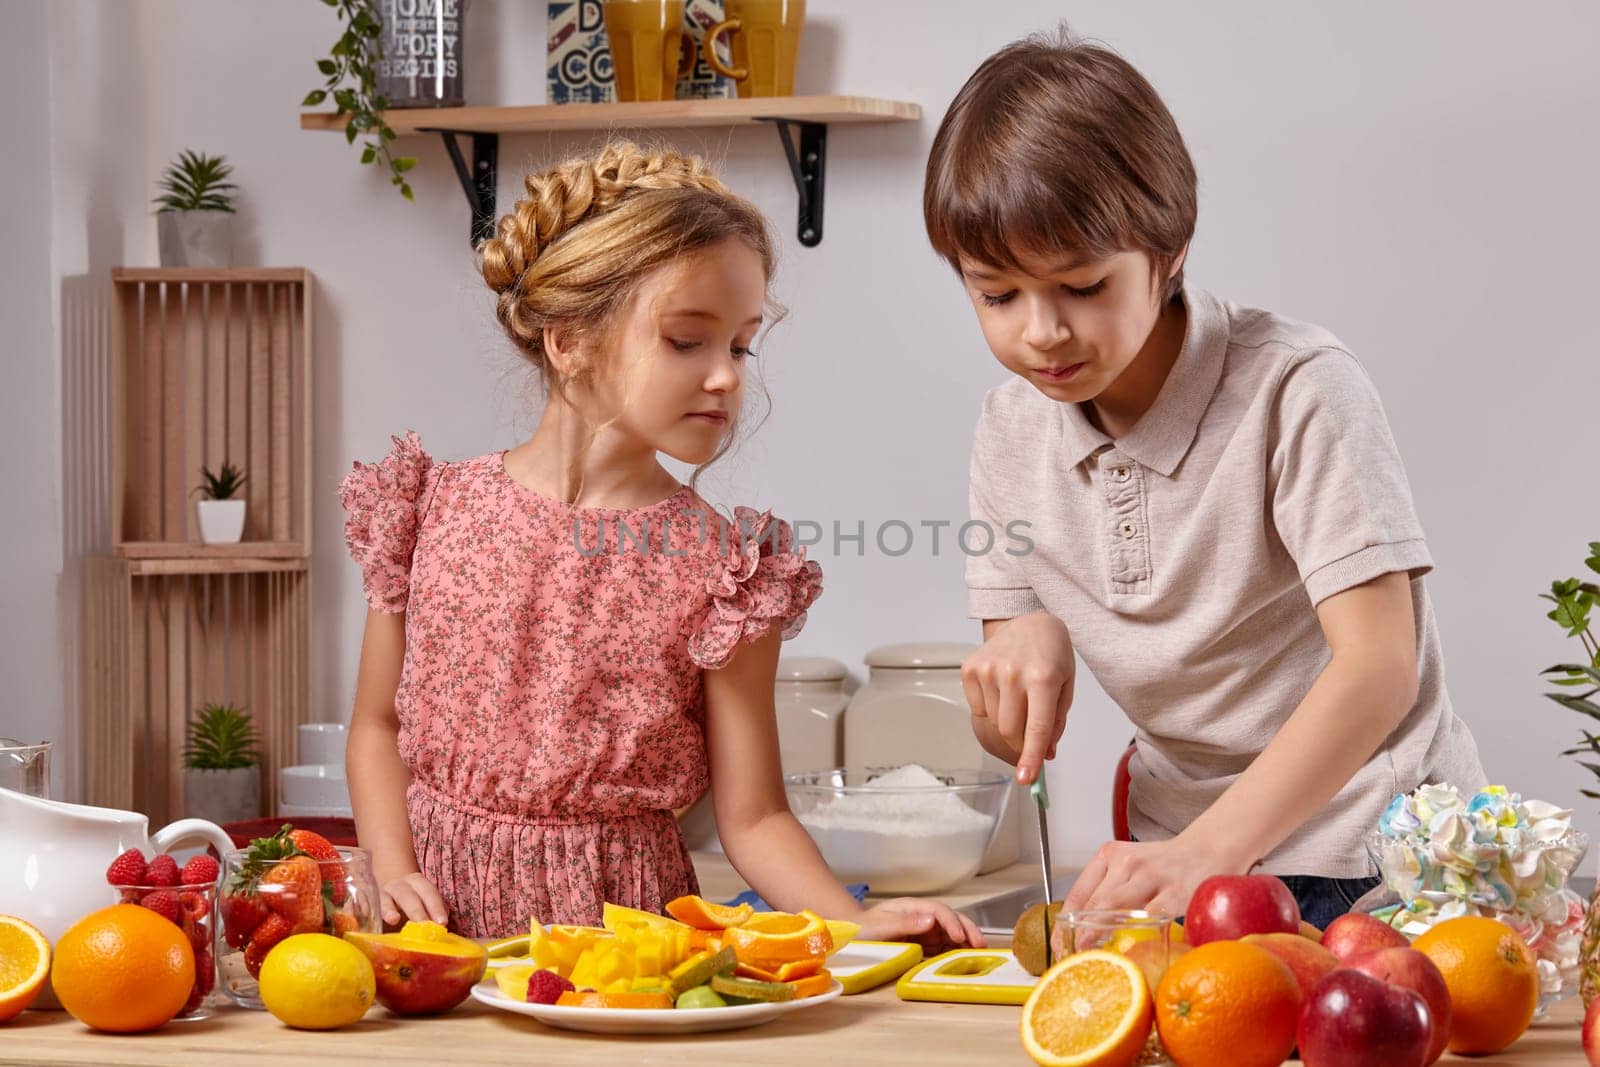 Cute cook couple. Boy with brown hair dressed in a light t-shirt and jeans with a little girl dressed in a pink dress with a braid in her hairstyle are at a kitchen against a white wall with shelves on it. Boy is cutting a kiwi and girl is looking at it.